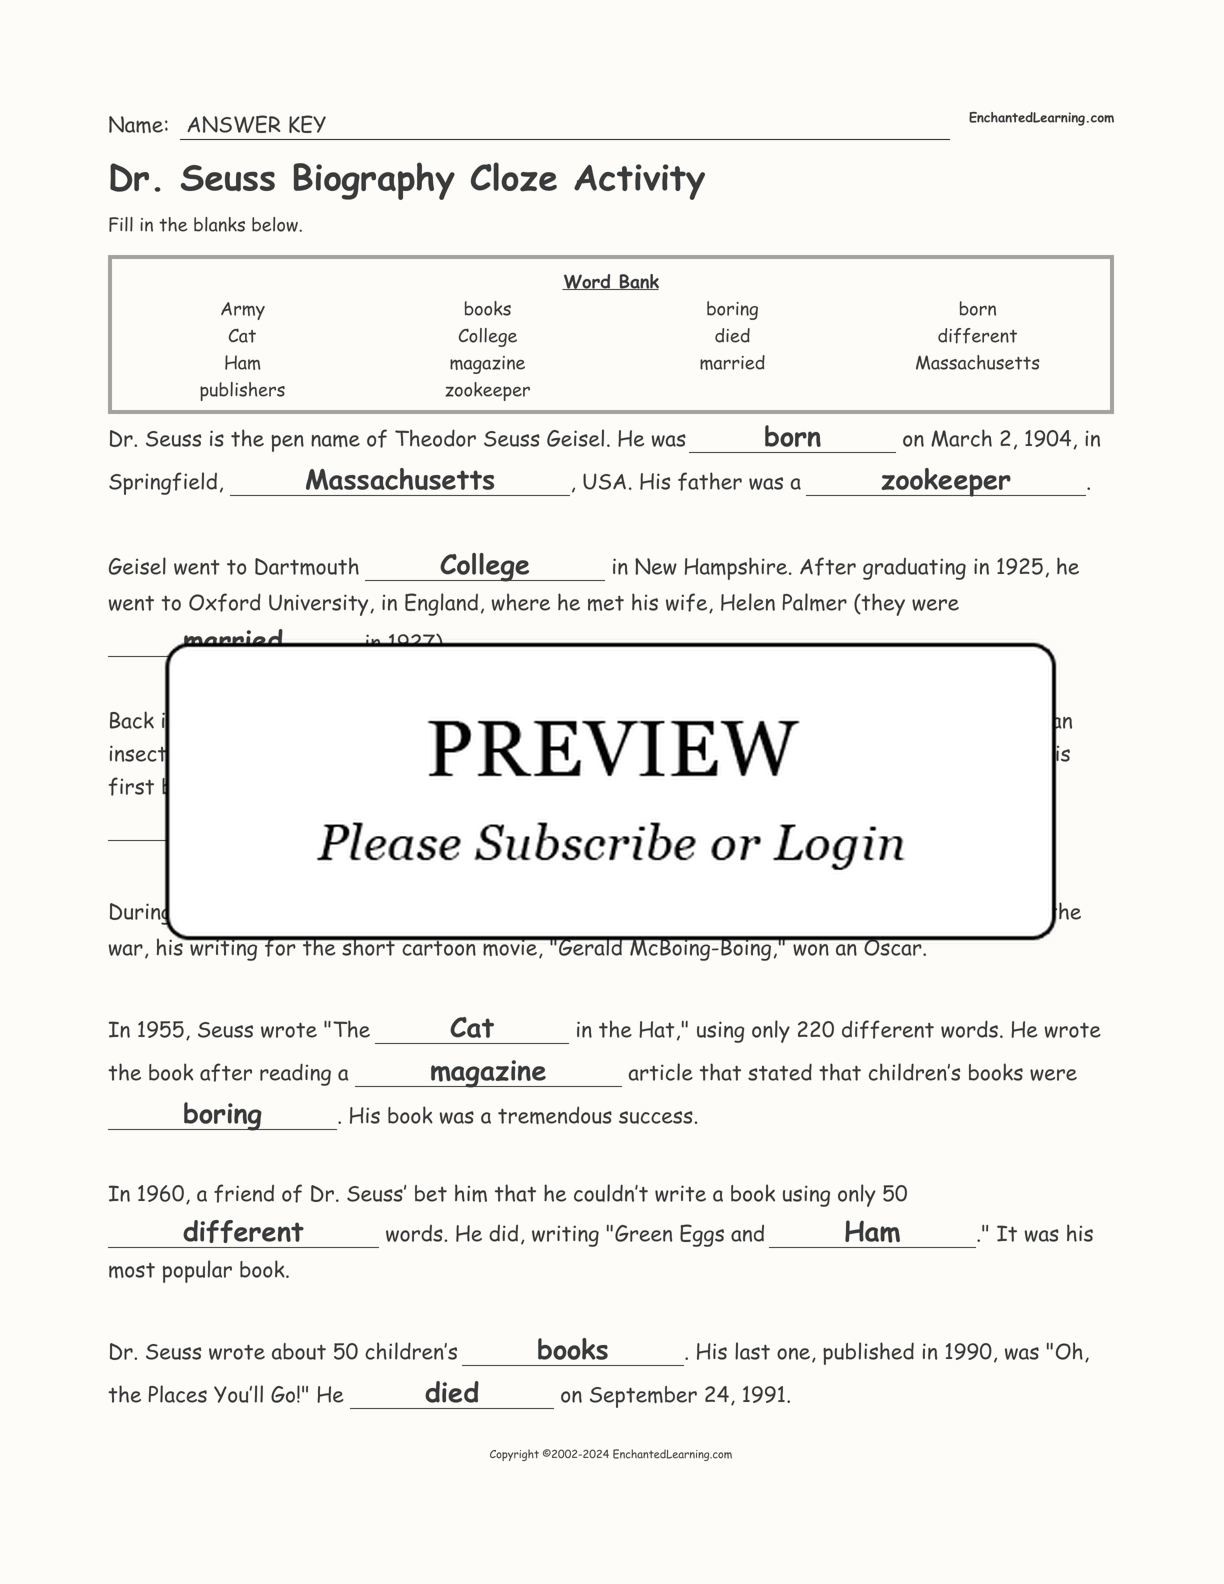 Dr. Seuss Biography Cloze Activity interactive worksheet page 2